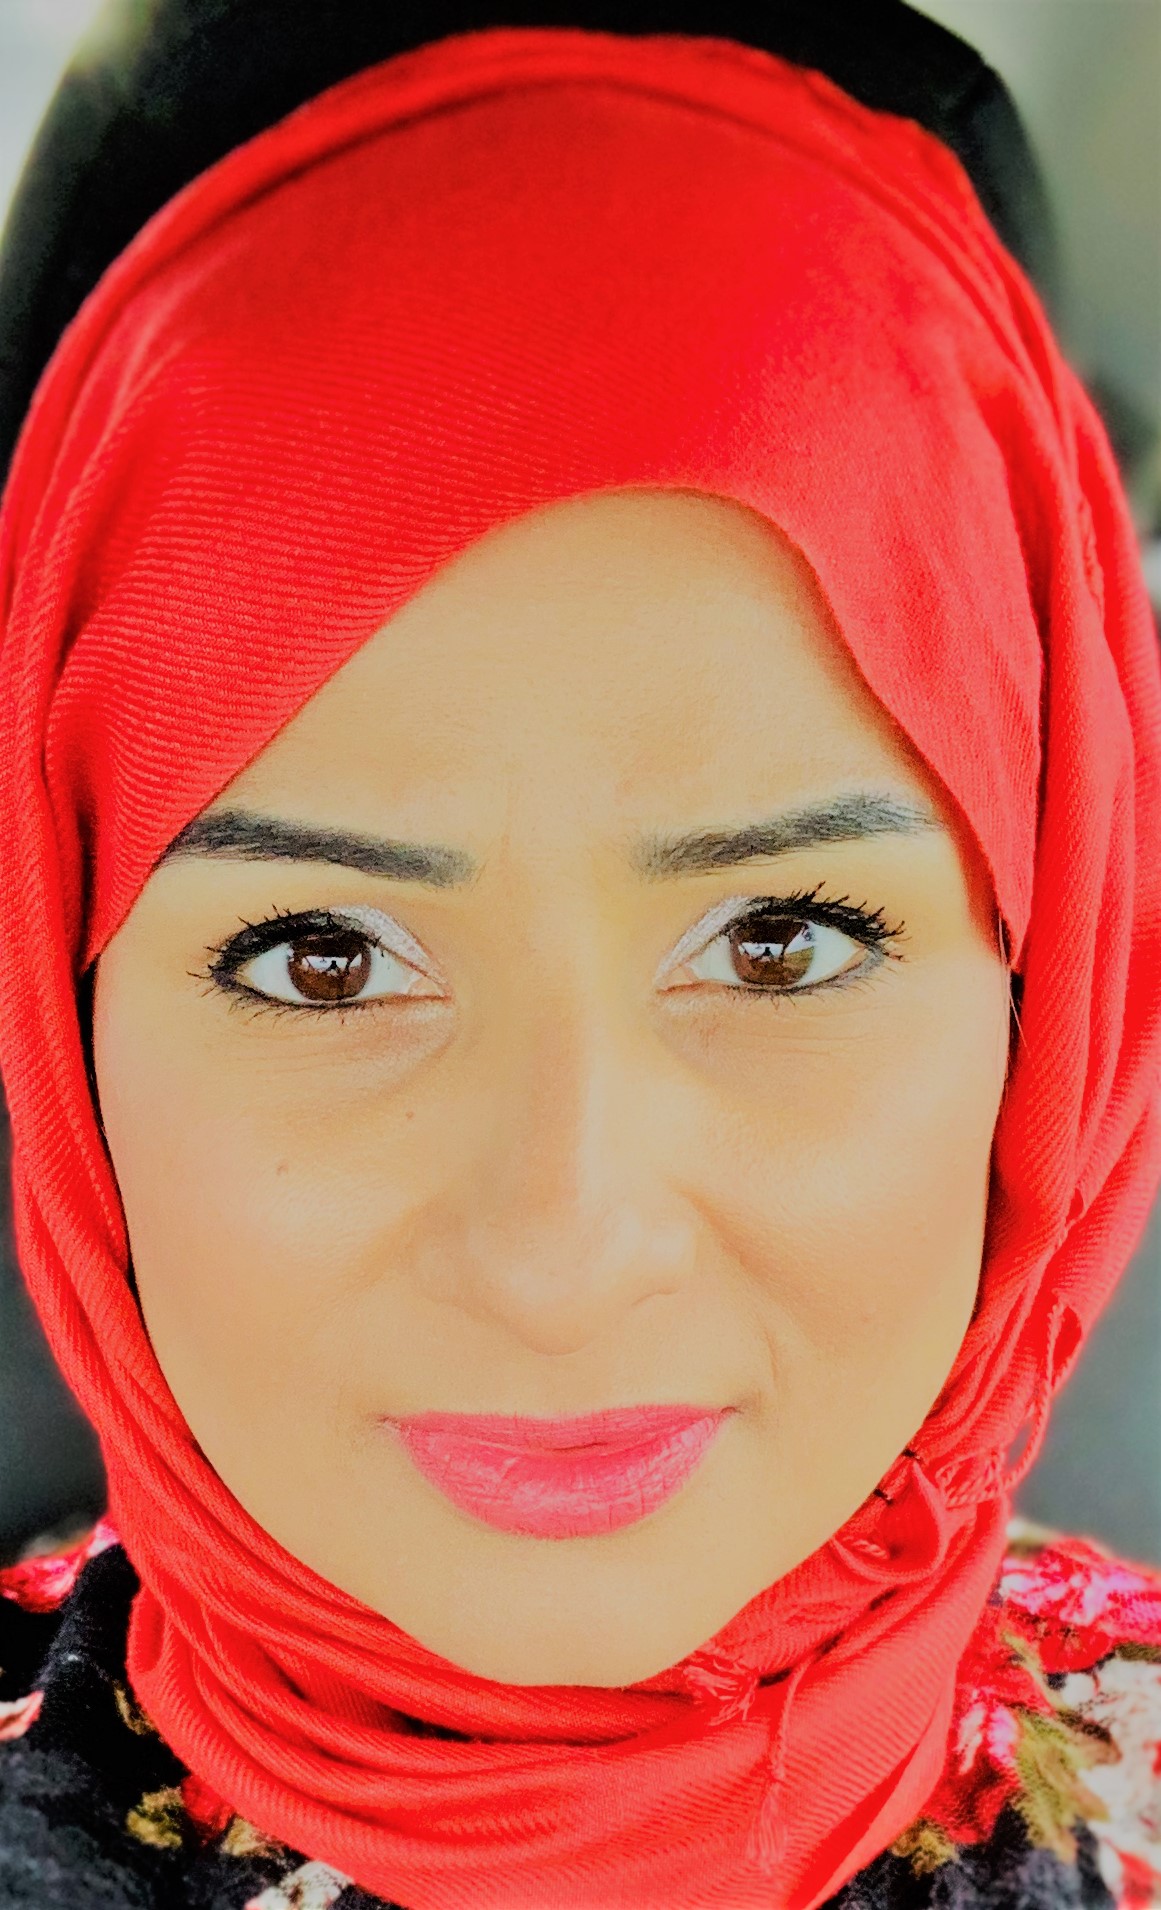 A woman wearing a red headscarf.